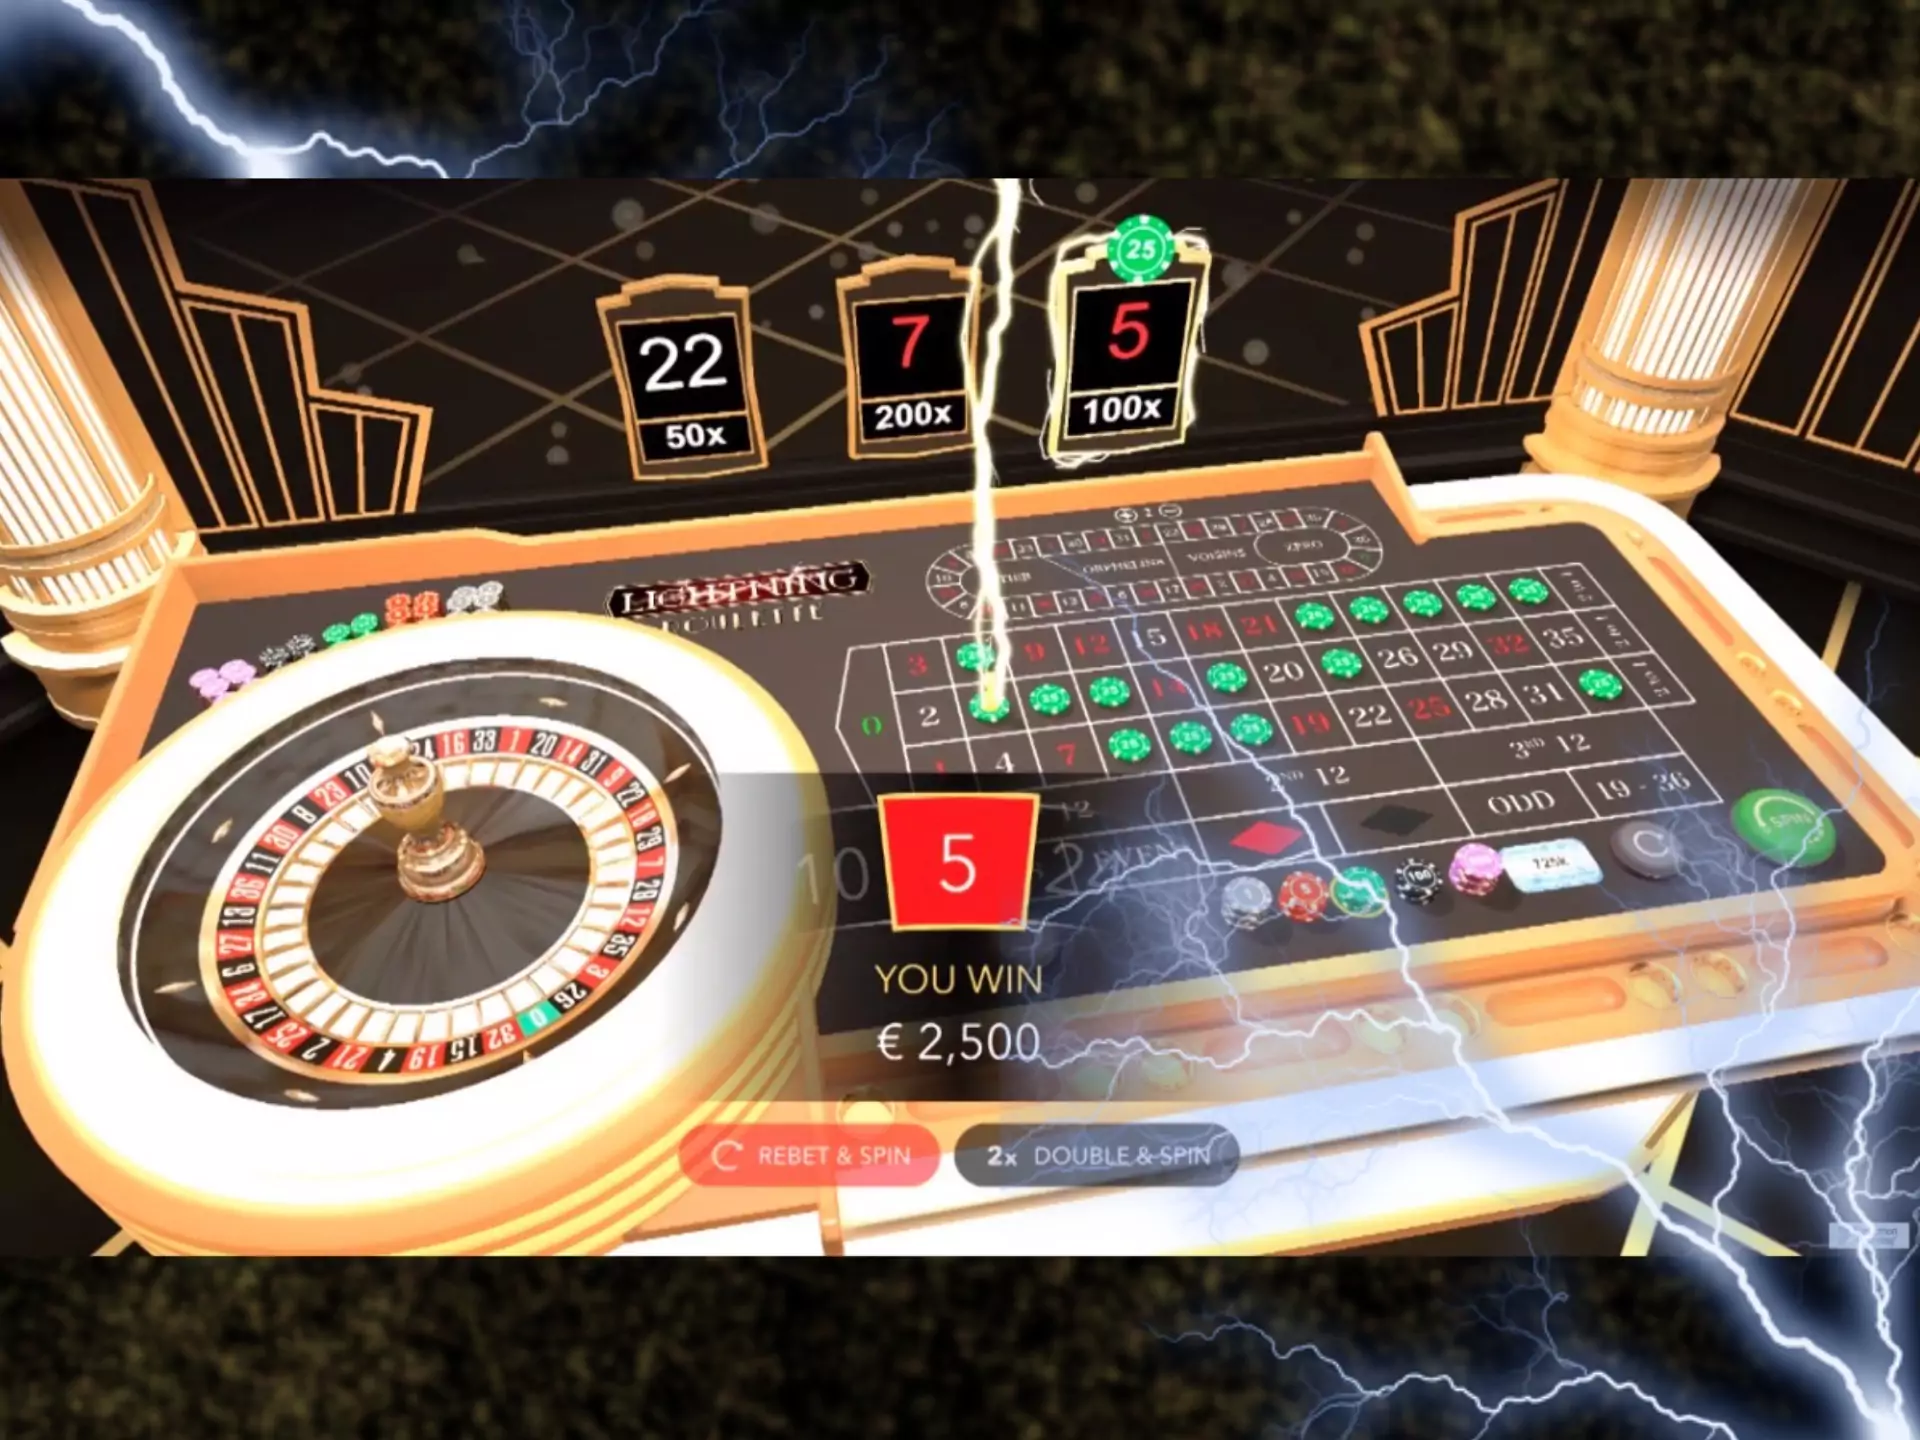 Register at an Indian online casino and play Lightning Roulette.